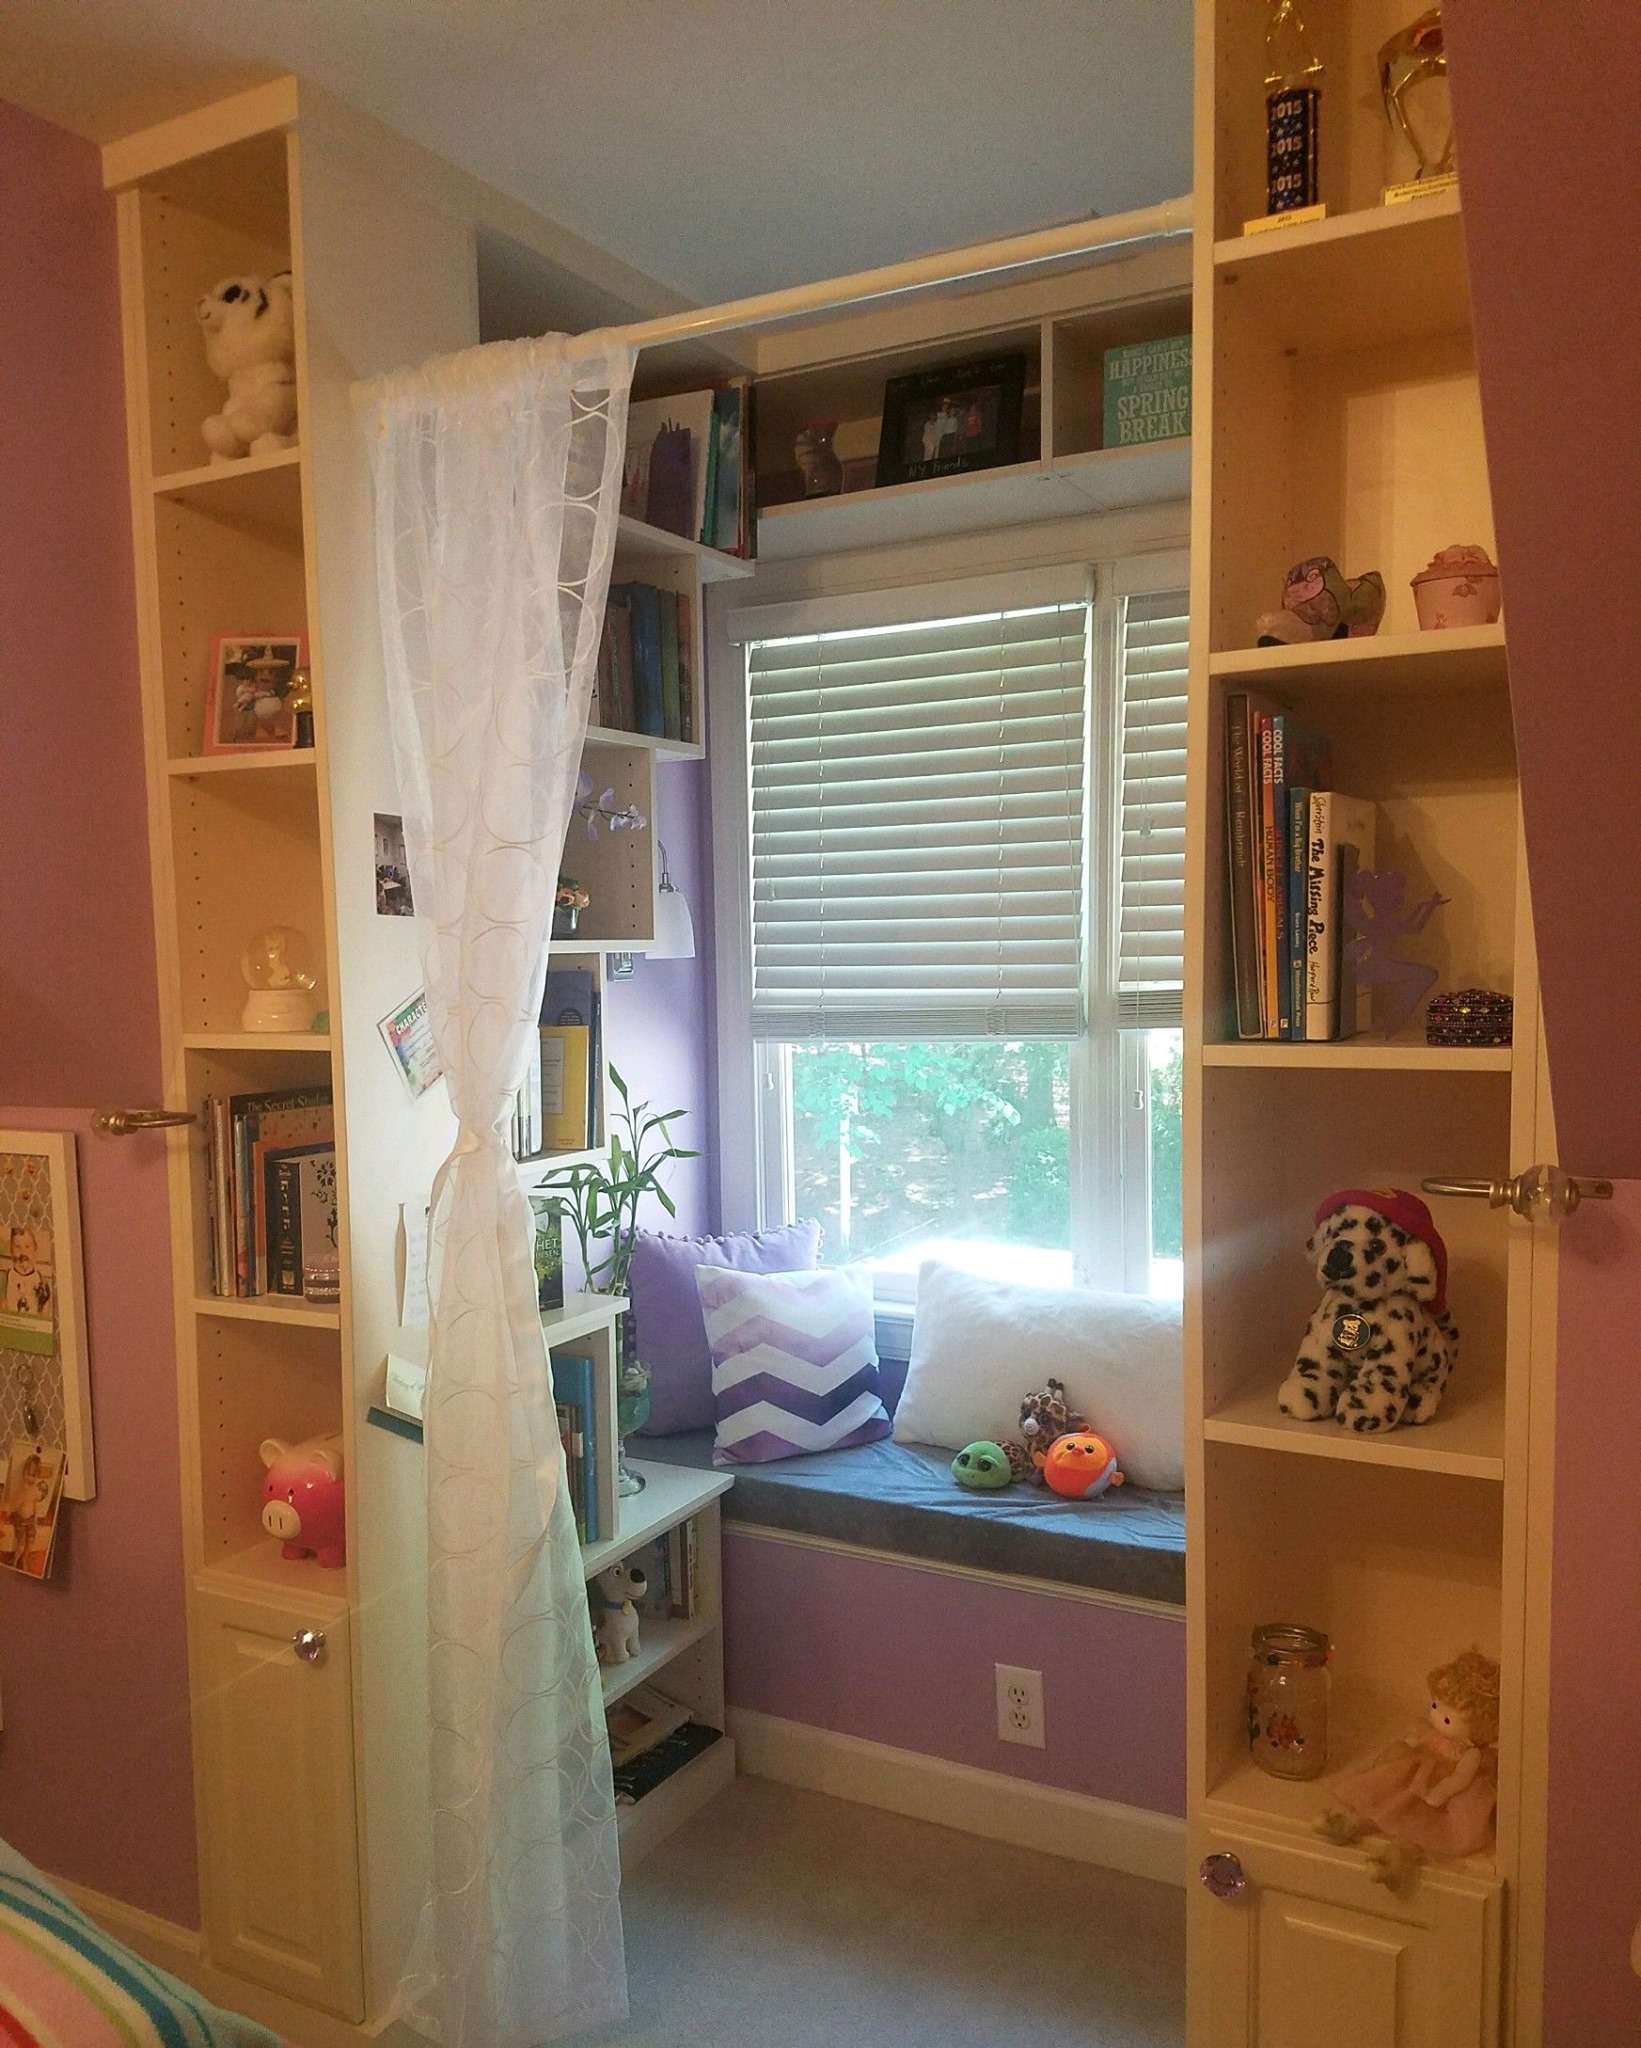 This little reading nook helps you organize your child's room